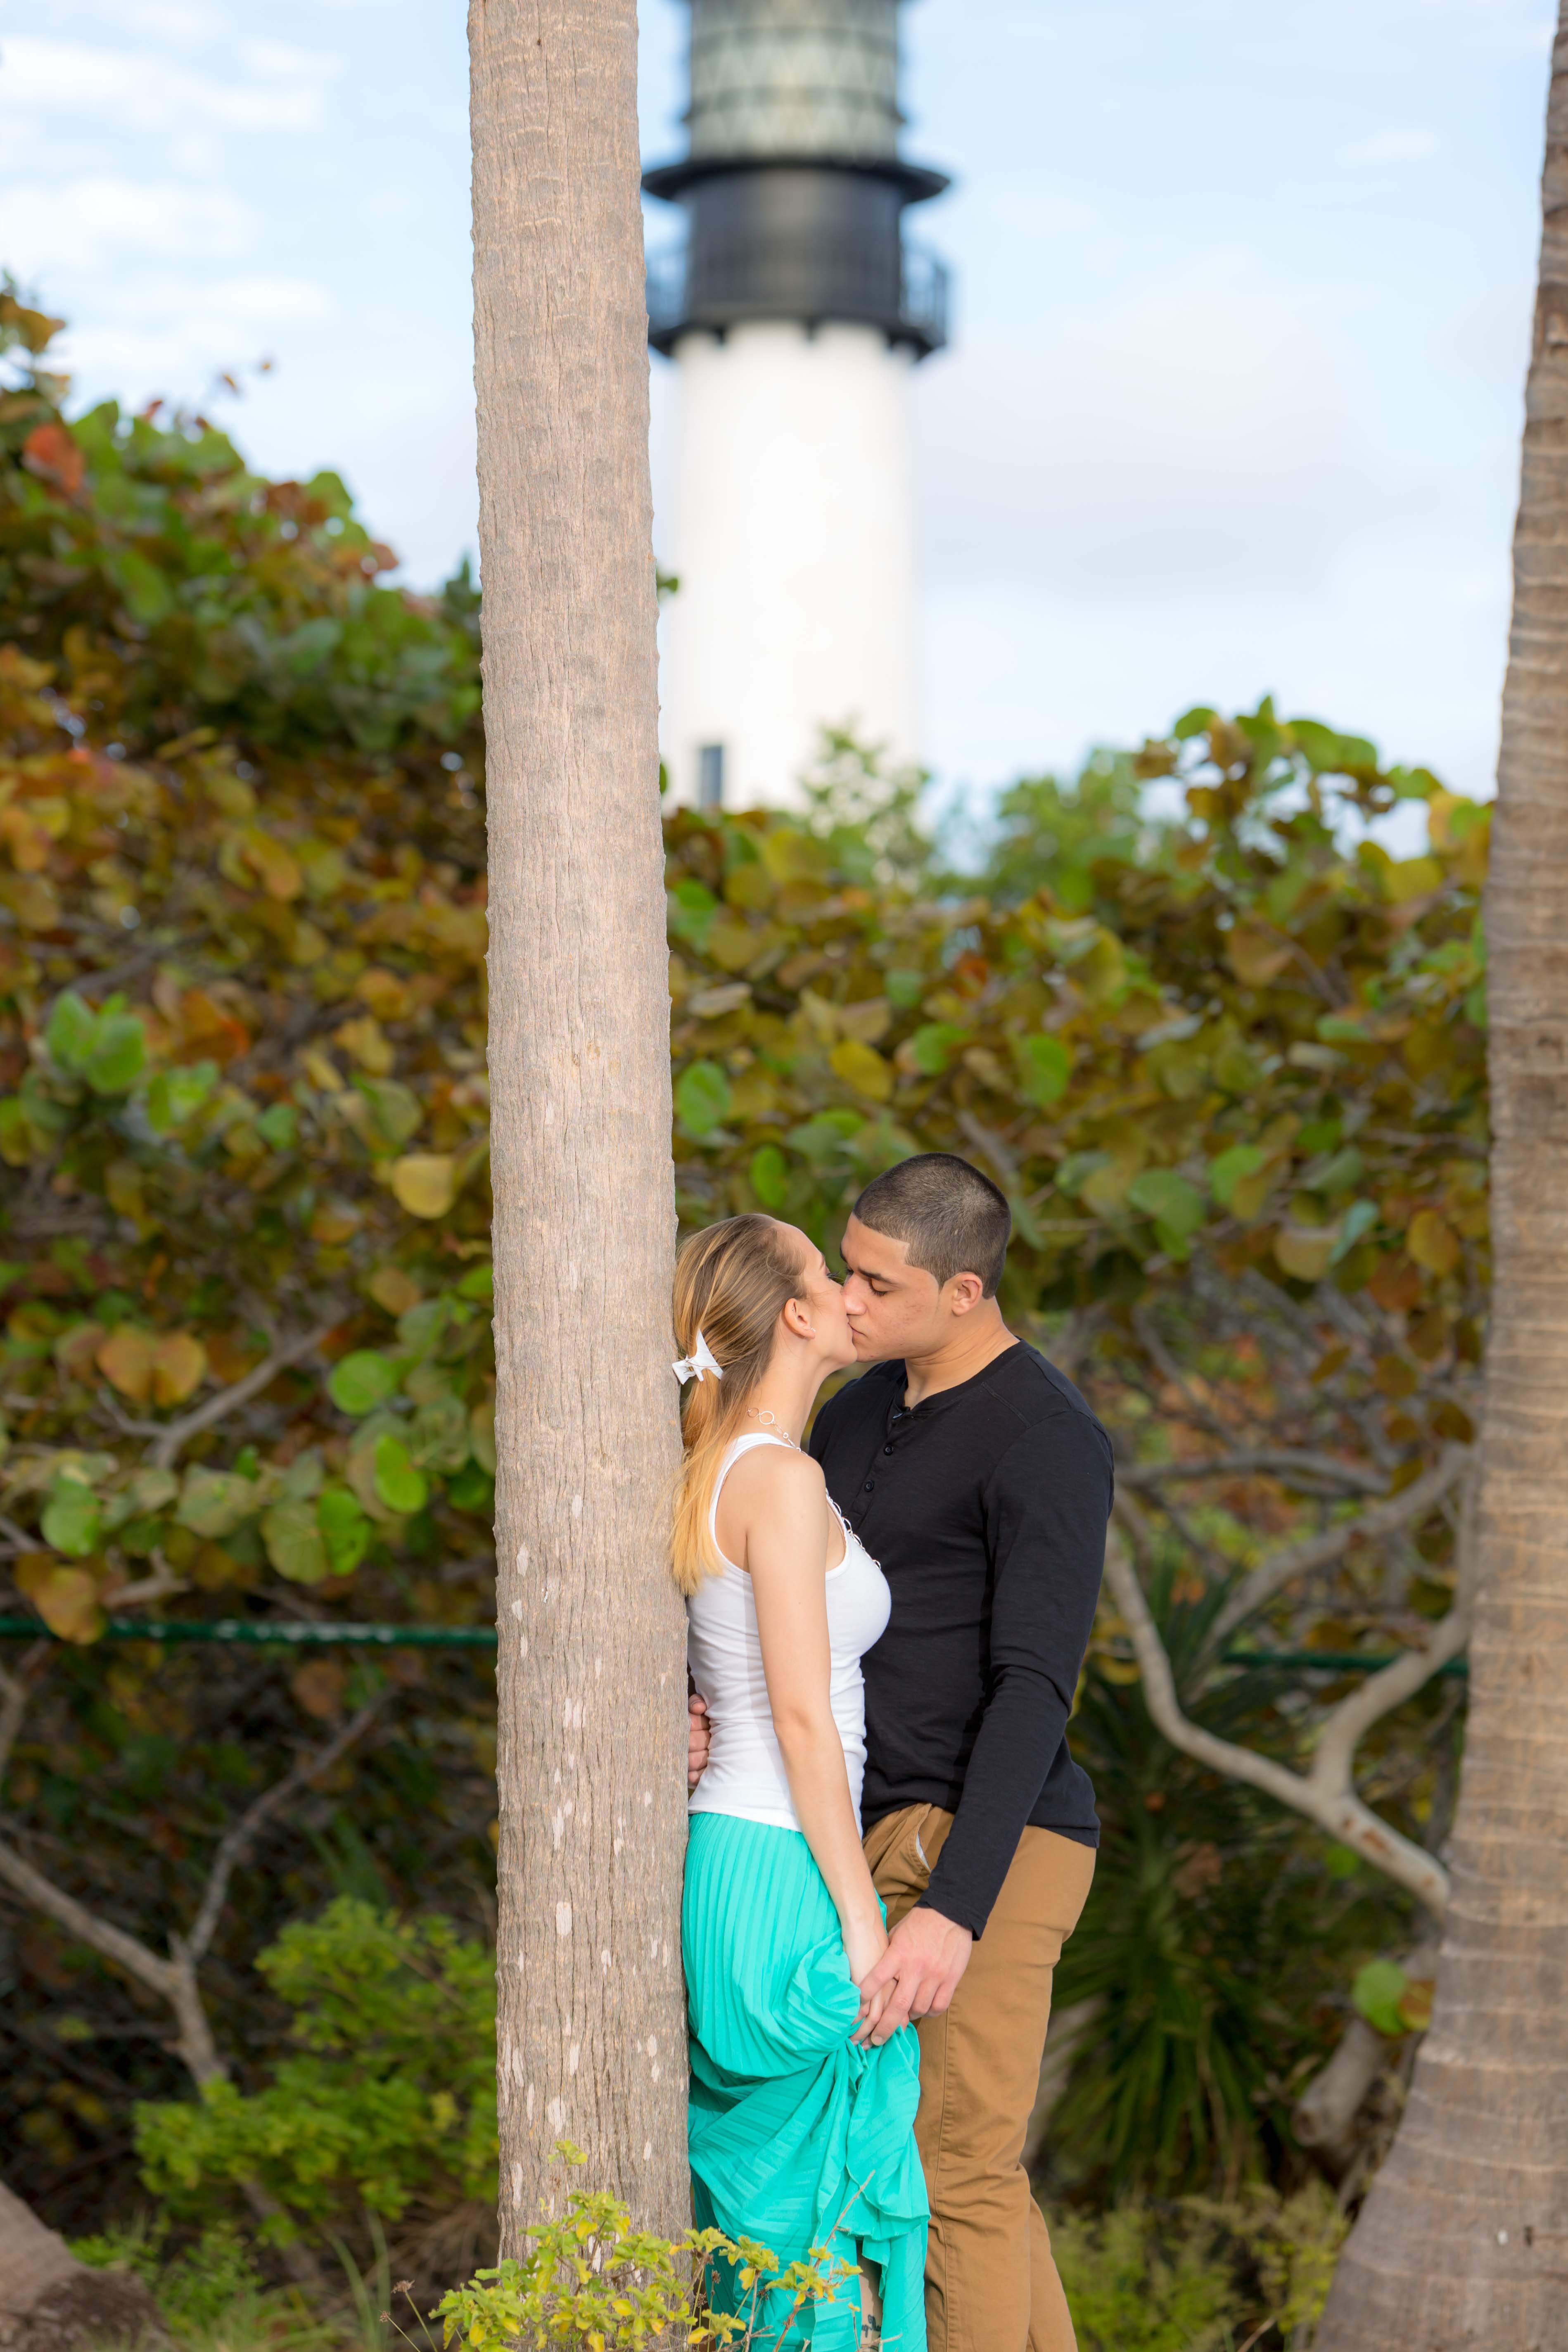 Beautiful Key Biscayne Engagement session at the Key Biscayne Lighthouse in Key Biscayne Florida